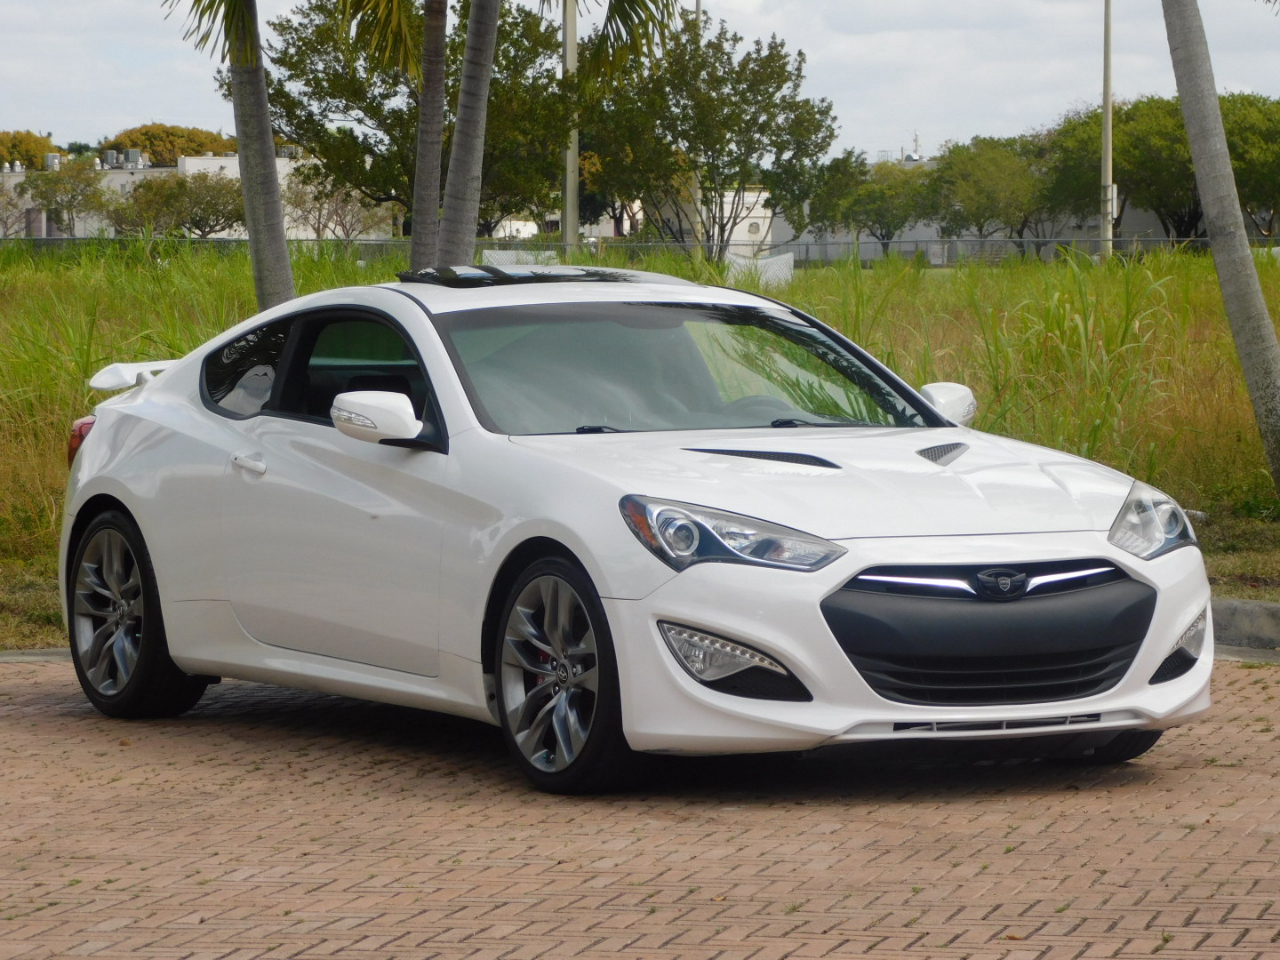 Used 2013 Hyundai Genesis Coupe 3.8 Track Manual for Sale in Miami FL ...